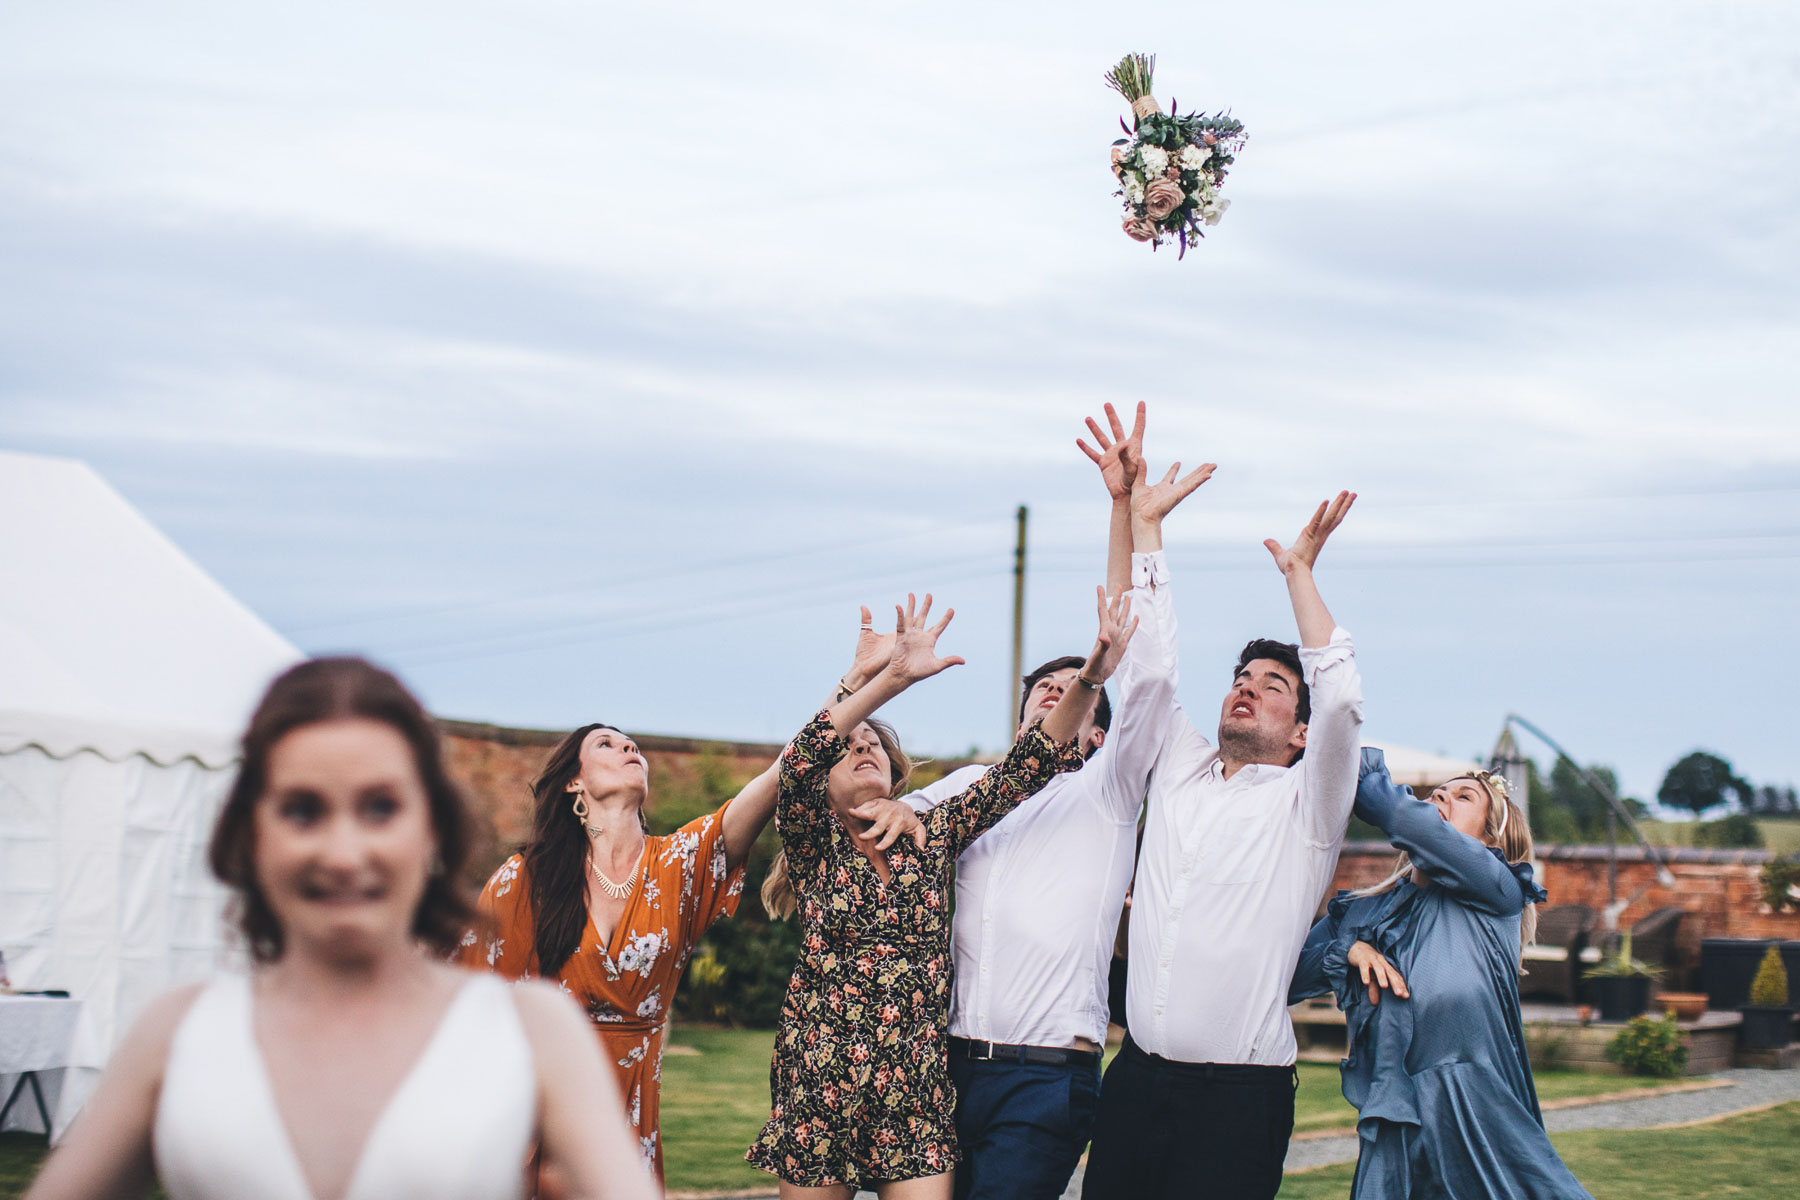 guests try to catch the wedding bouquet